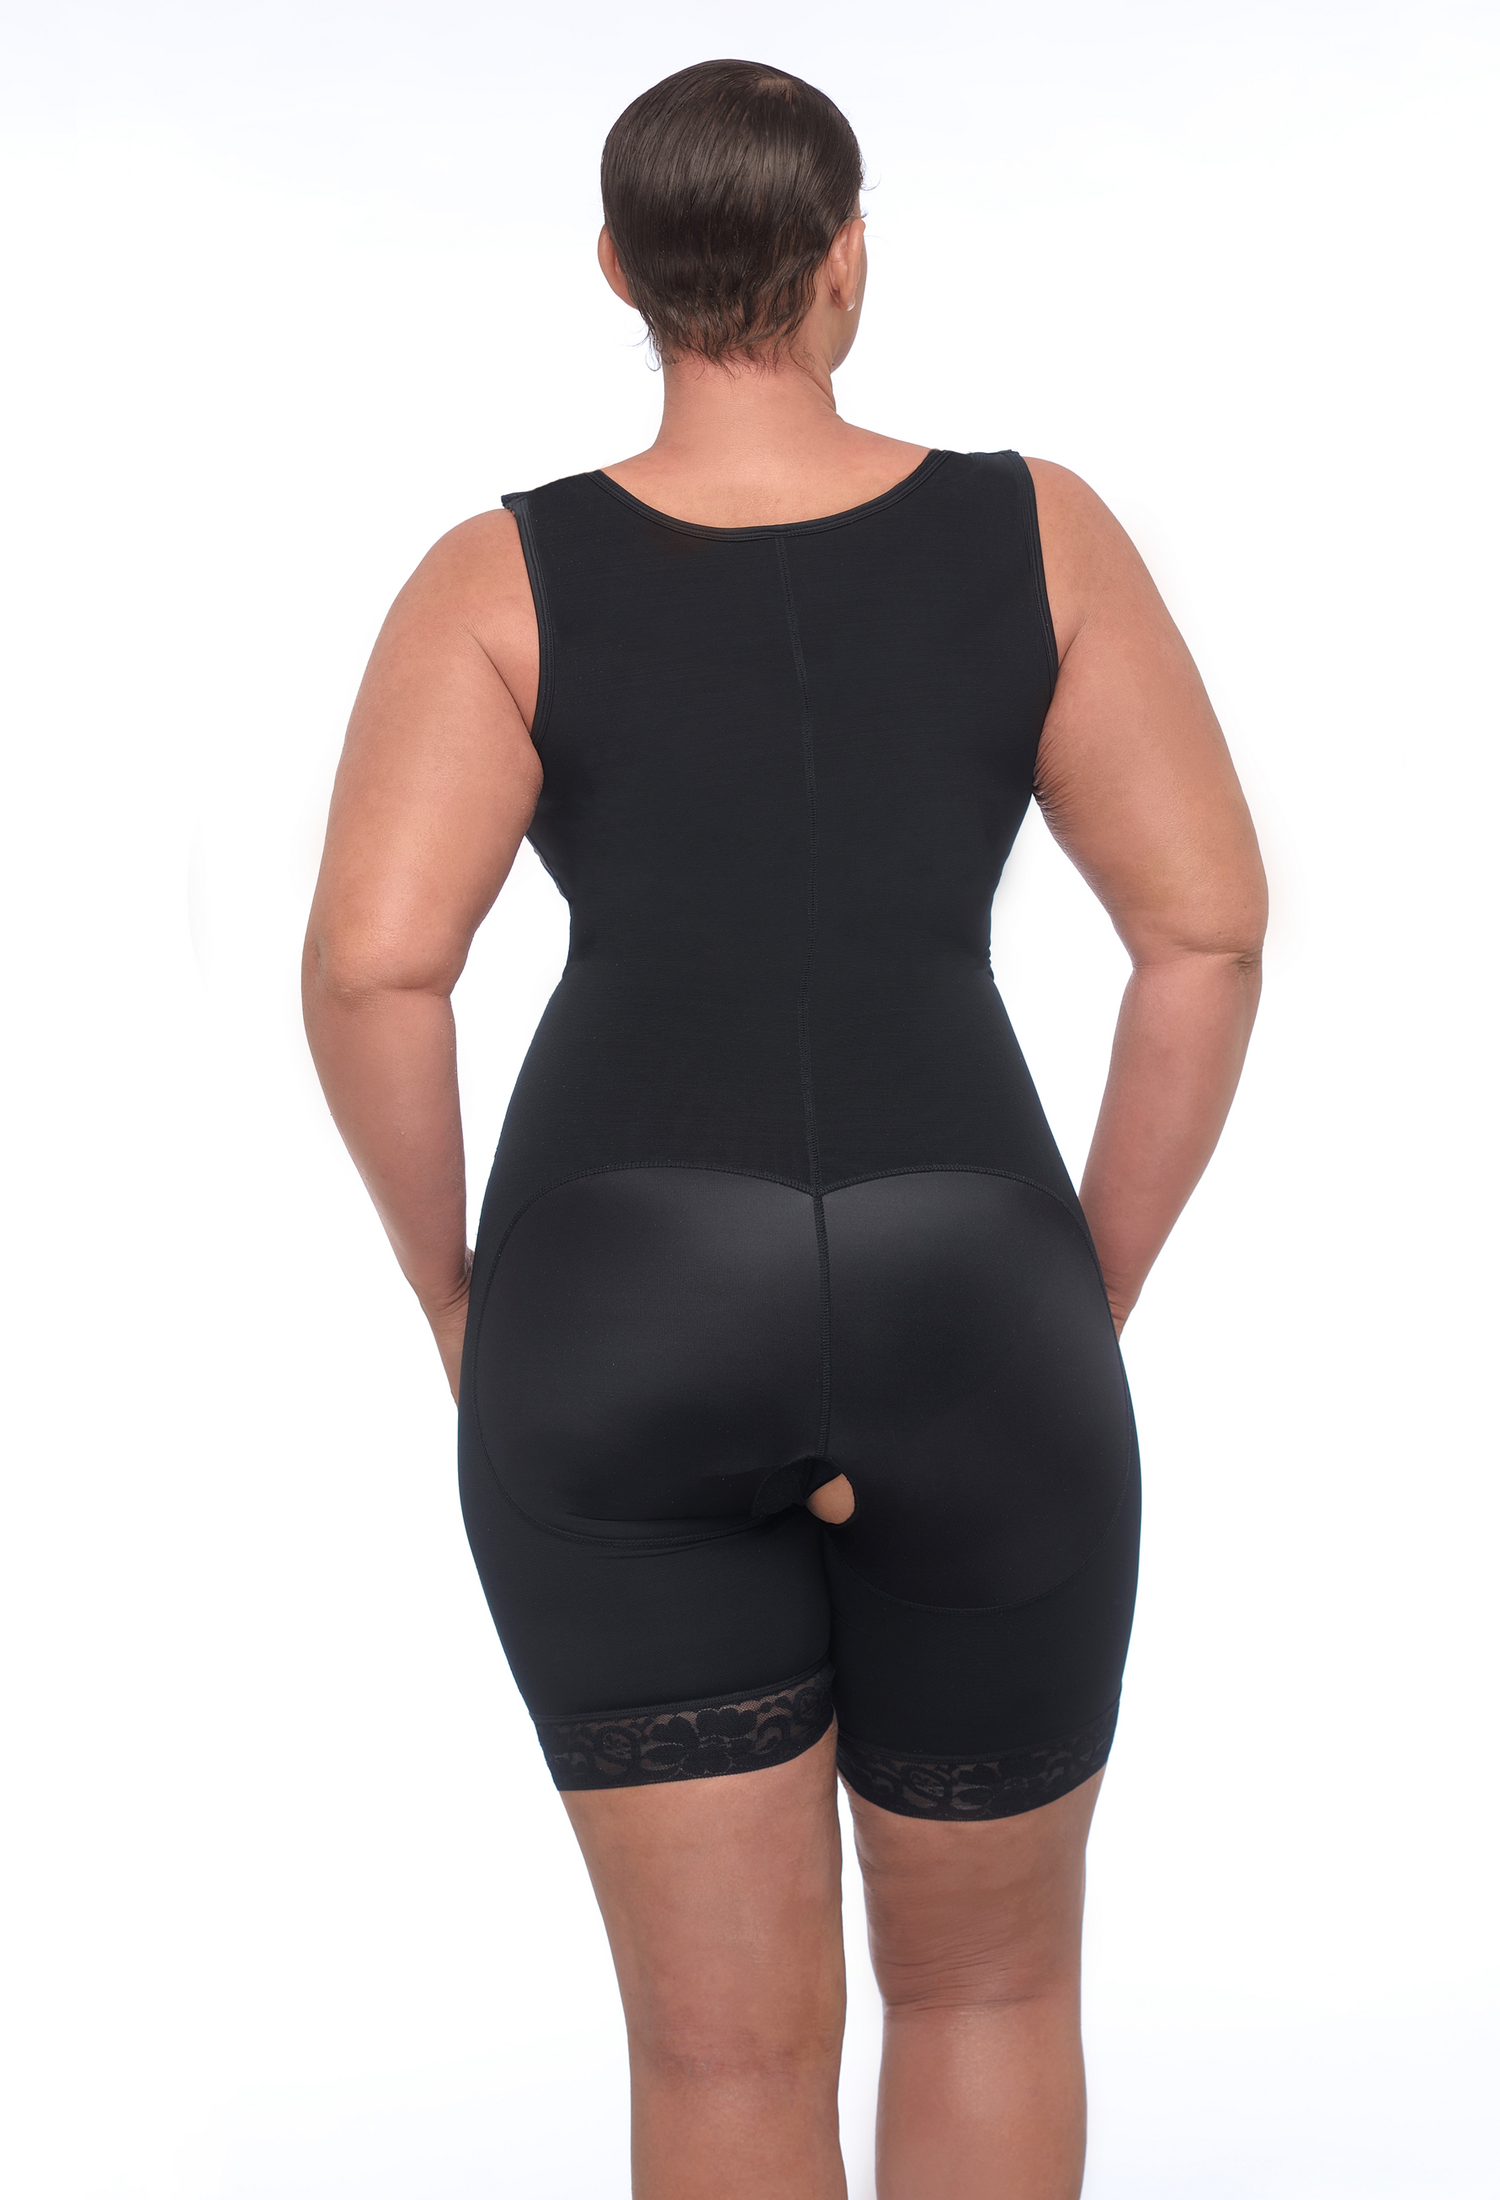 Diva's Curves - Full Coverage Shapewear Compression - Post Surgical This  comfortable Shapewear Compression garment tightens your stomach, hips, and  derriere to flatten out and give you sexy curves. 1. Wide adjustable